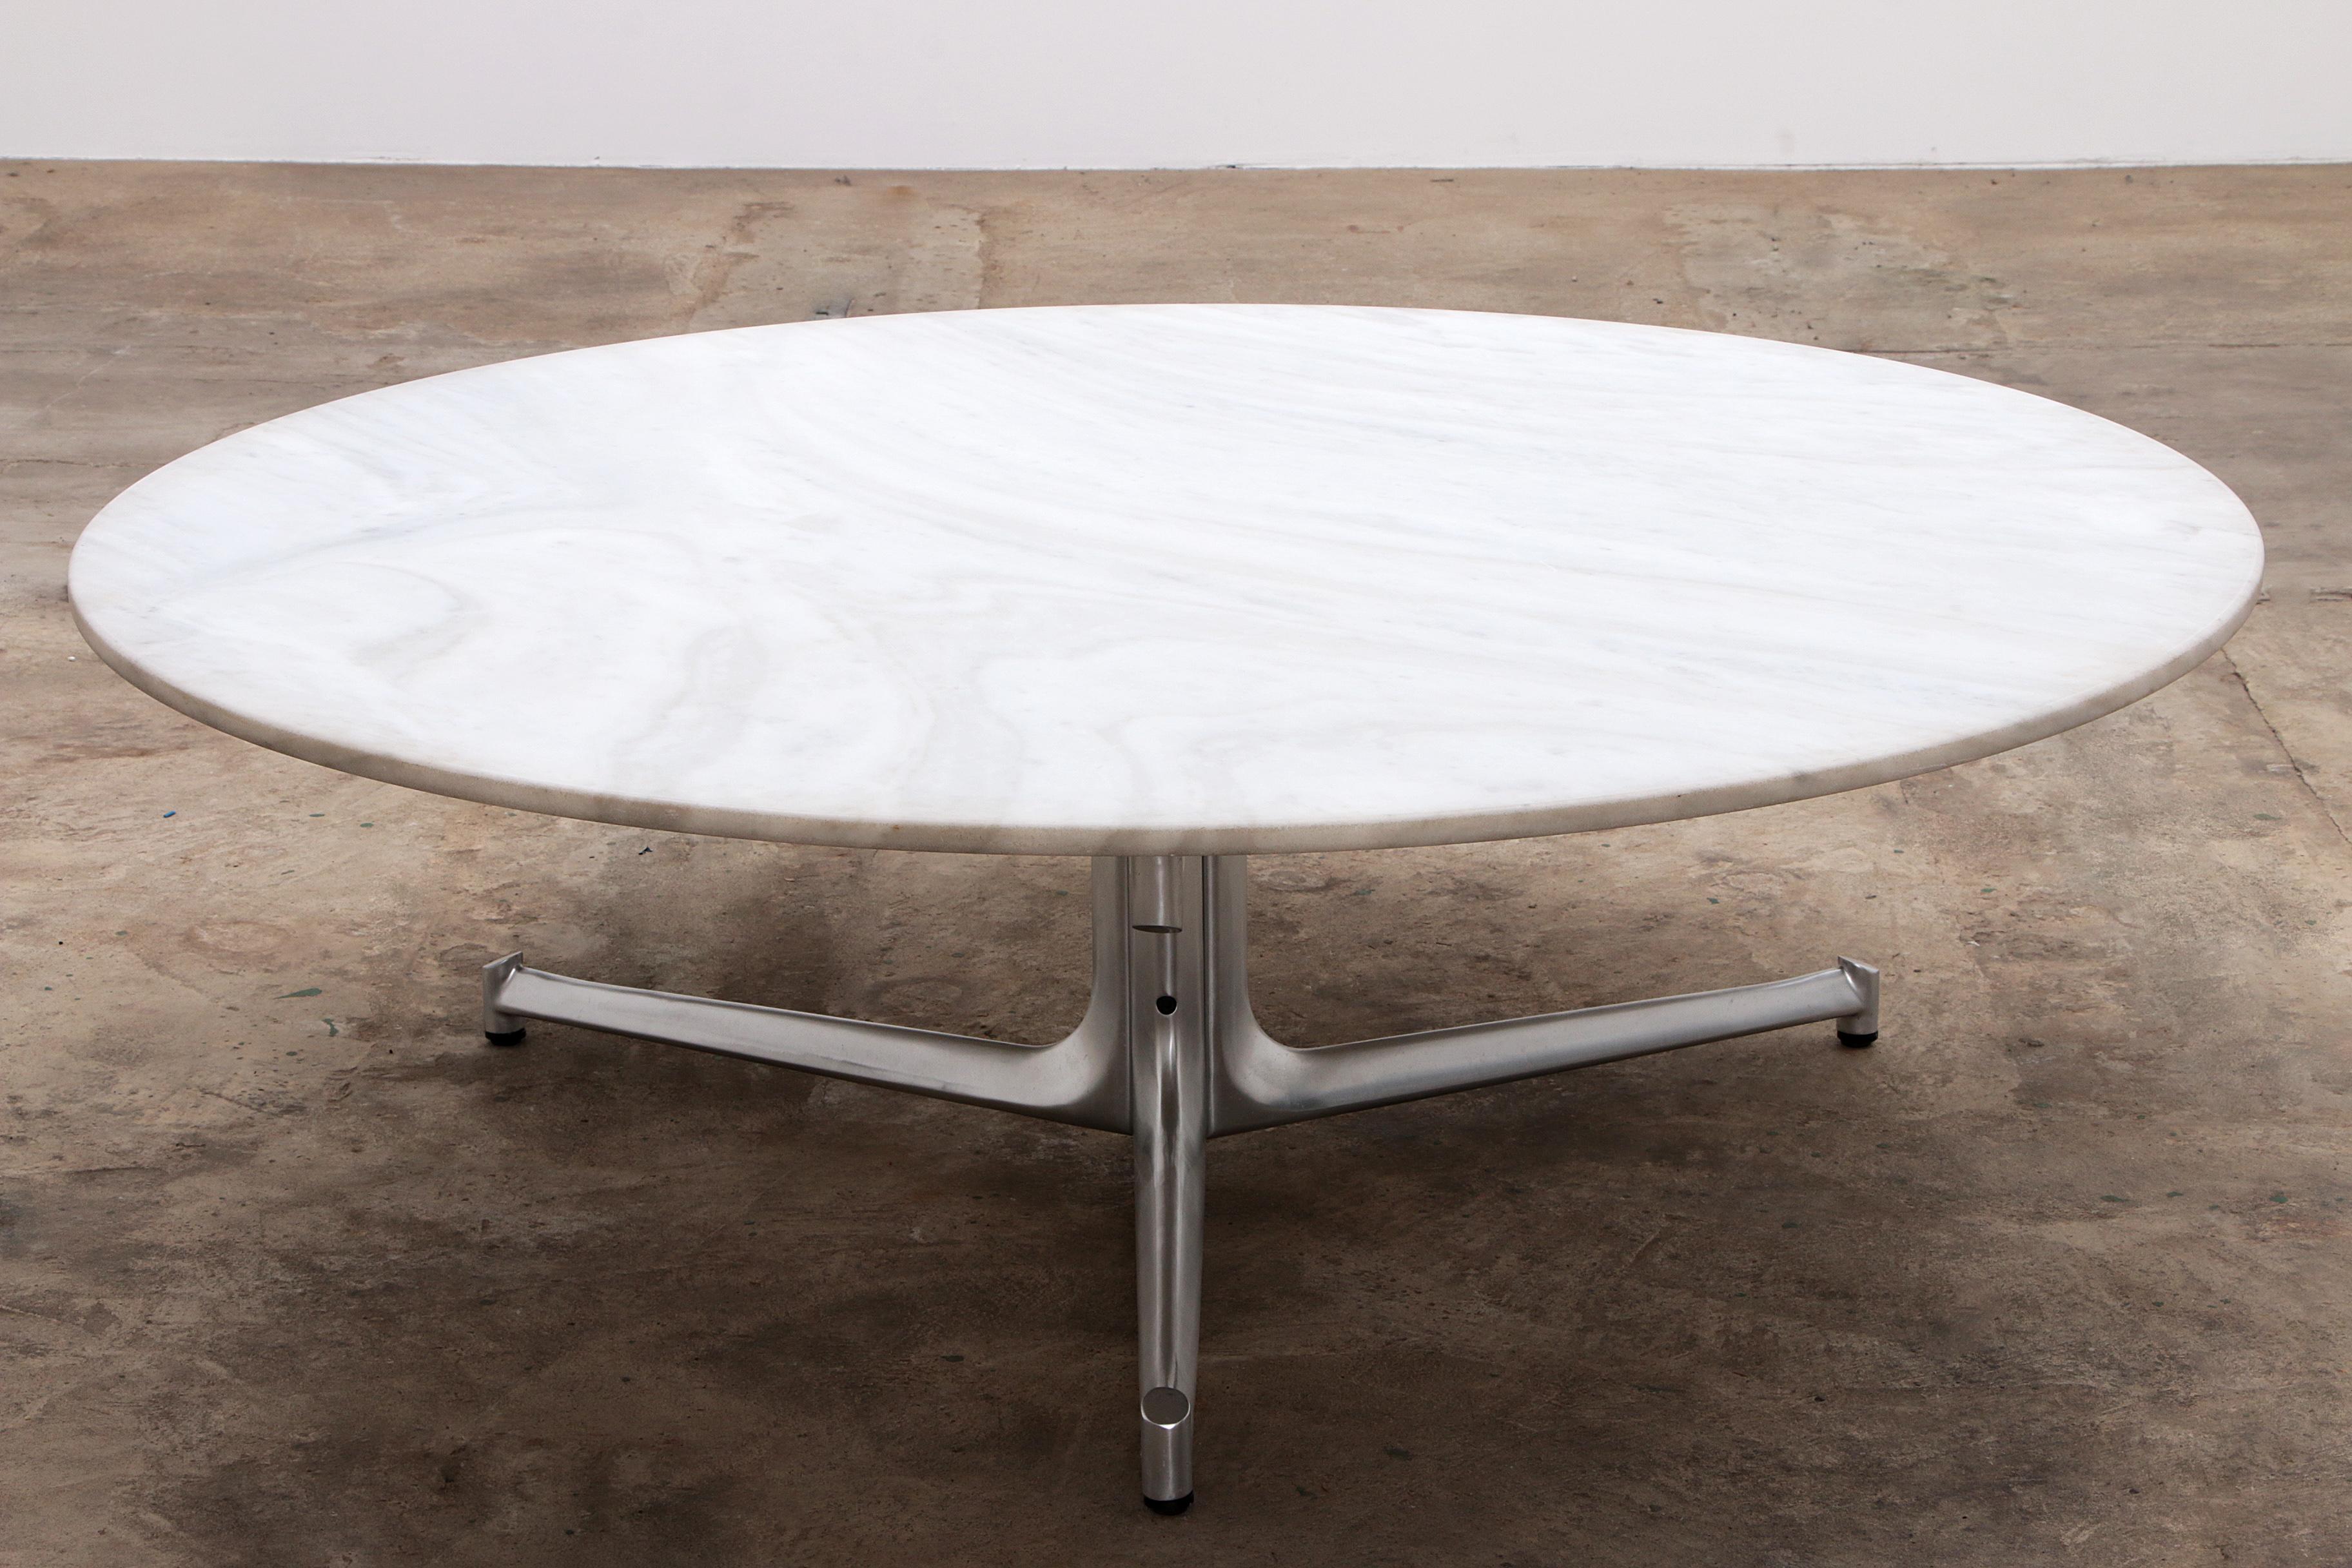 Marble coffee table T105 by Preben Fabricius & Jorgen Kastholm for Kill International, 1968. Diameter 150 cm

This T105 table series is a large round coffee table model designed by Preben Fabricius and Jorgen Kastholm, manufactured by Kill